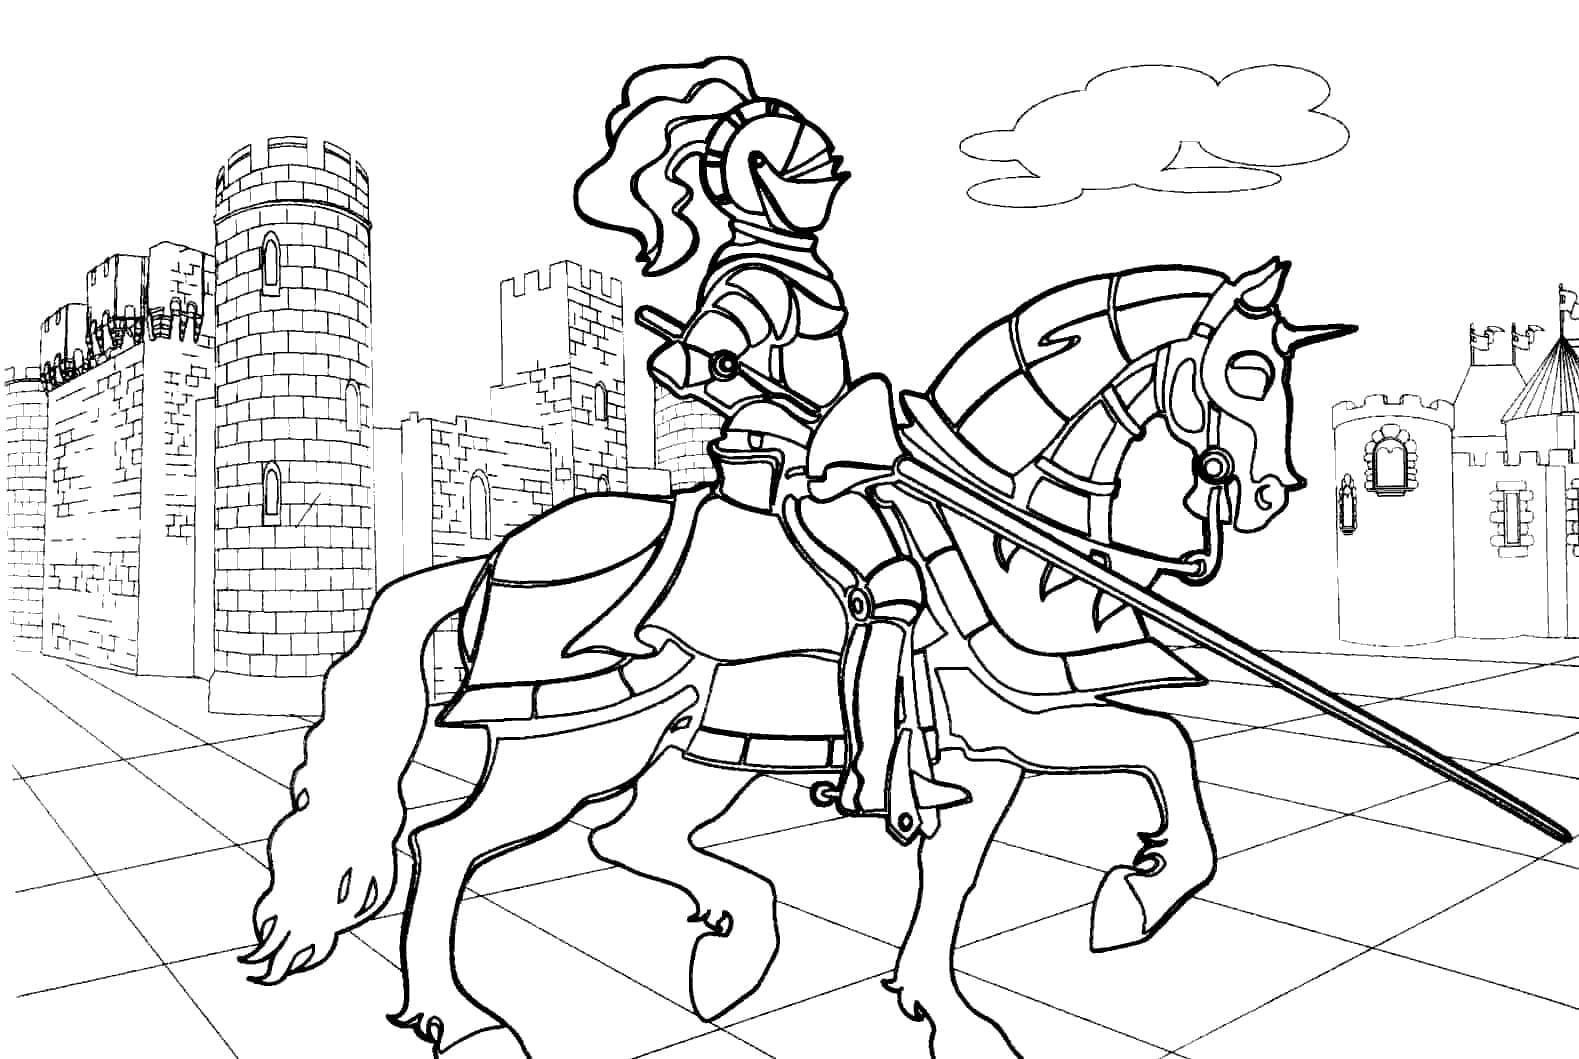 Coloring Pages For Boys 12 Years Olds